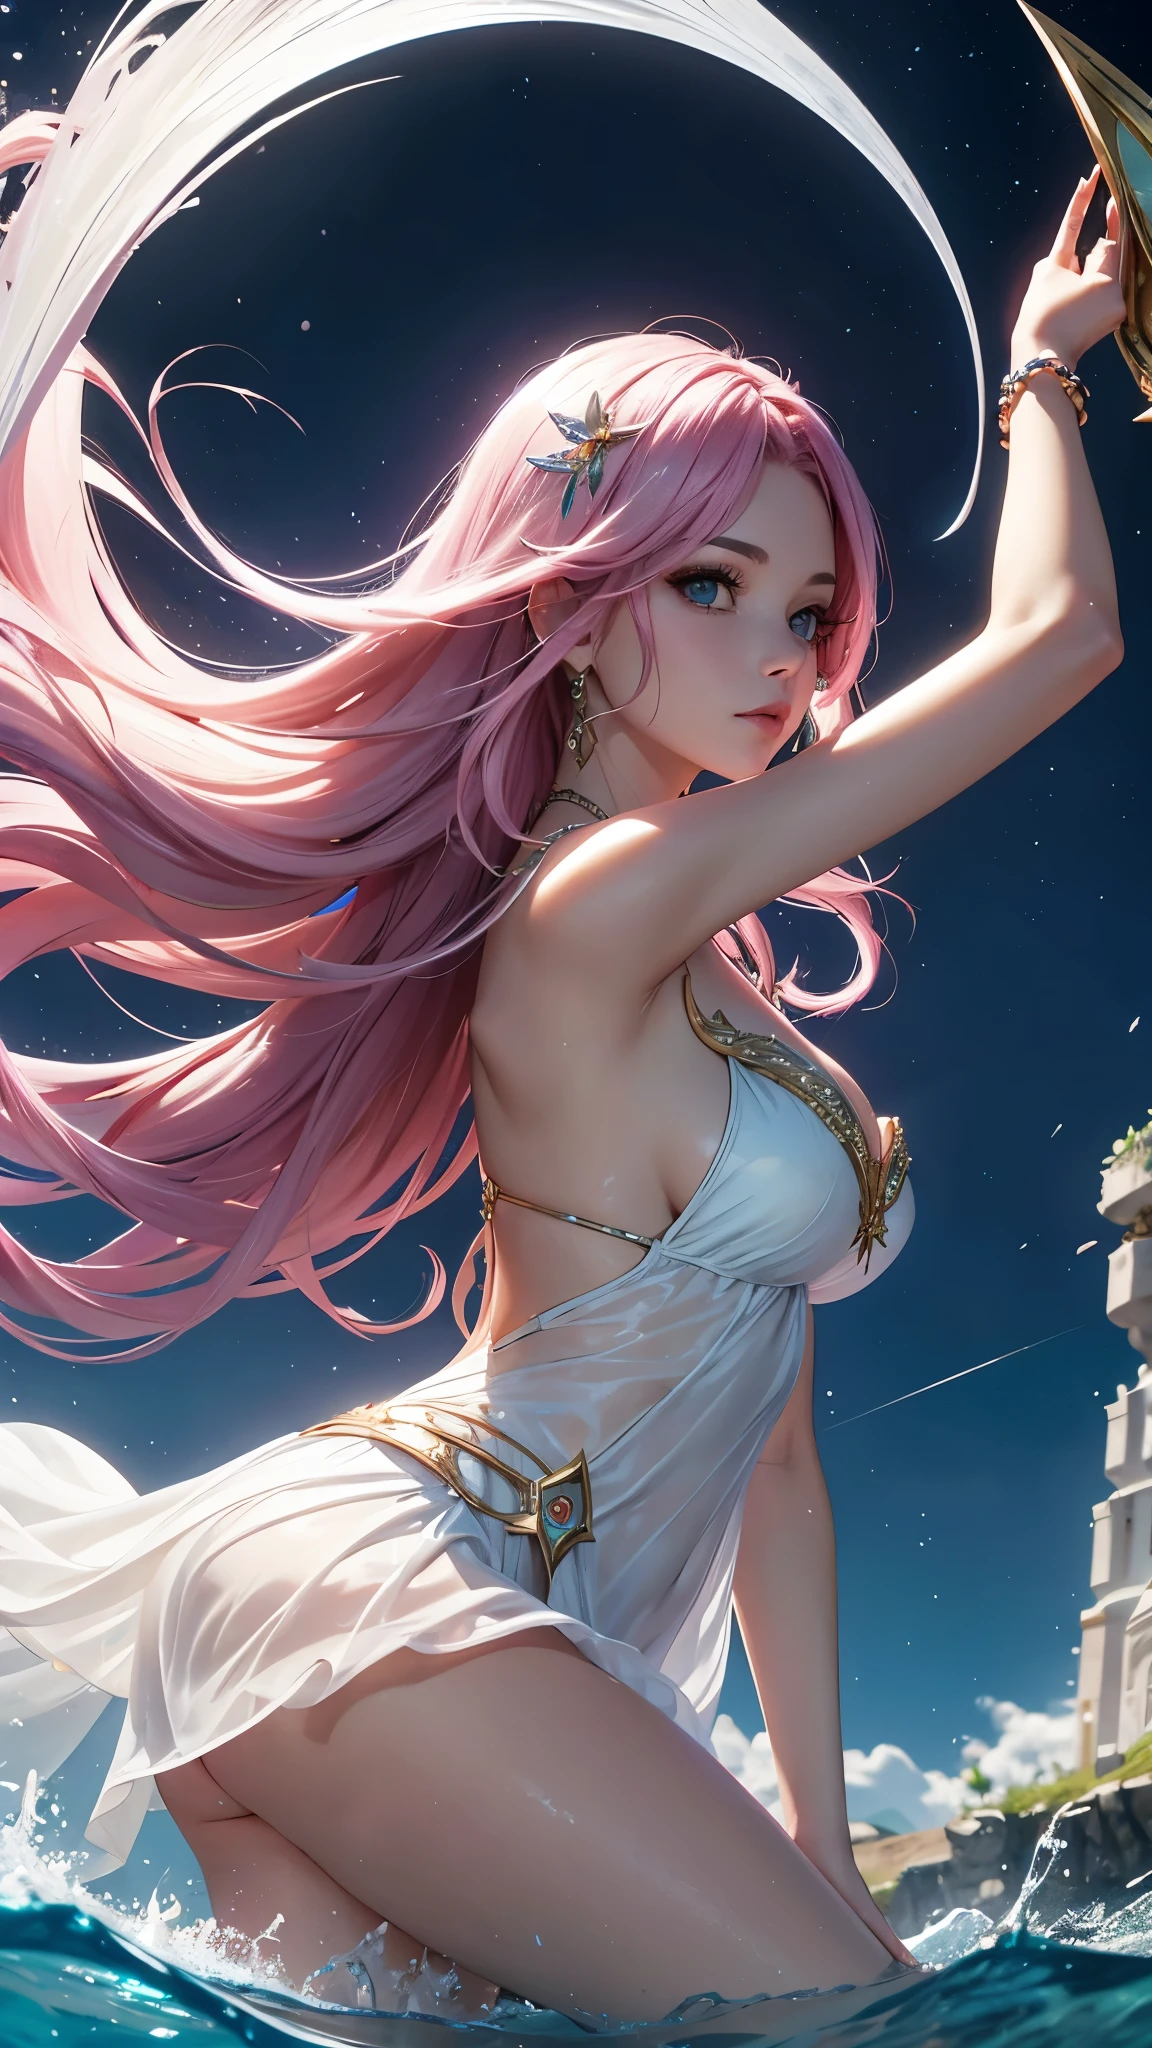 serafina1, League of Legends, pink hair, Brilliant effects, wide, neckline, long flowing white dress, Moon in the background, floating in the air, praying